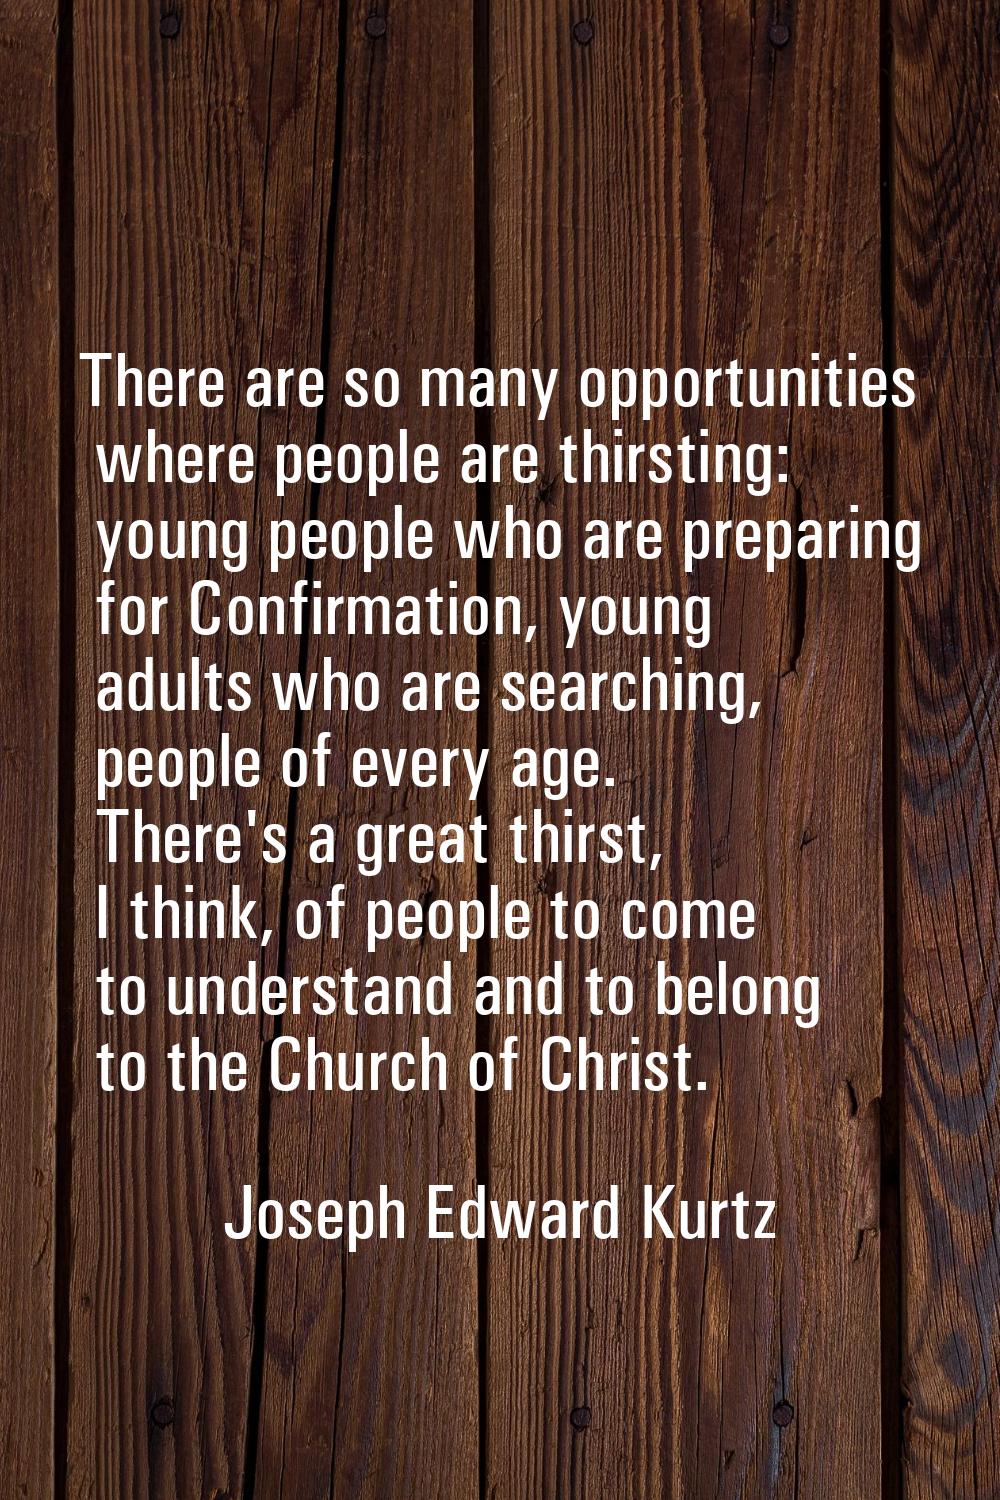 There are so many opportunities where people are thirsting: young people who are preparing for Conf